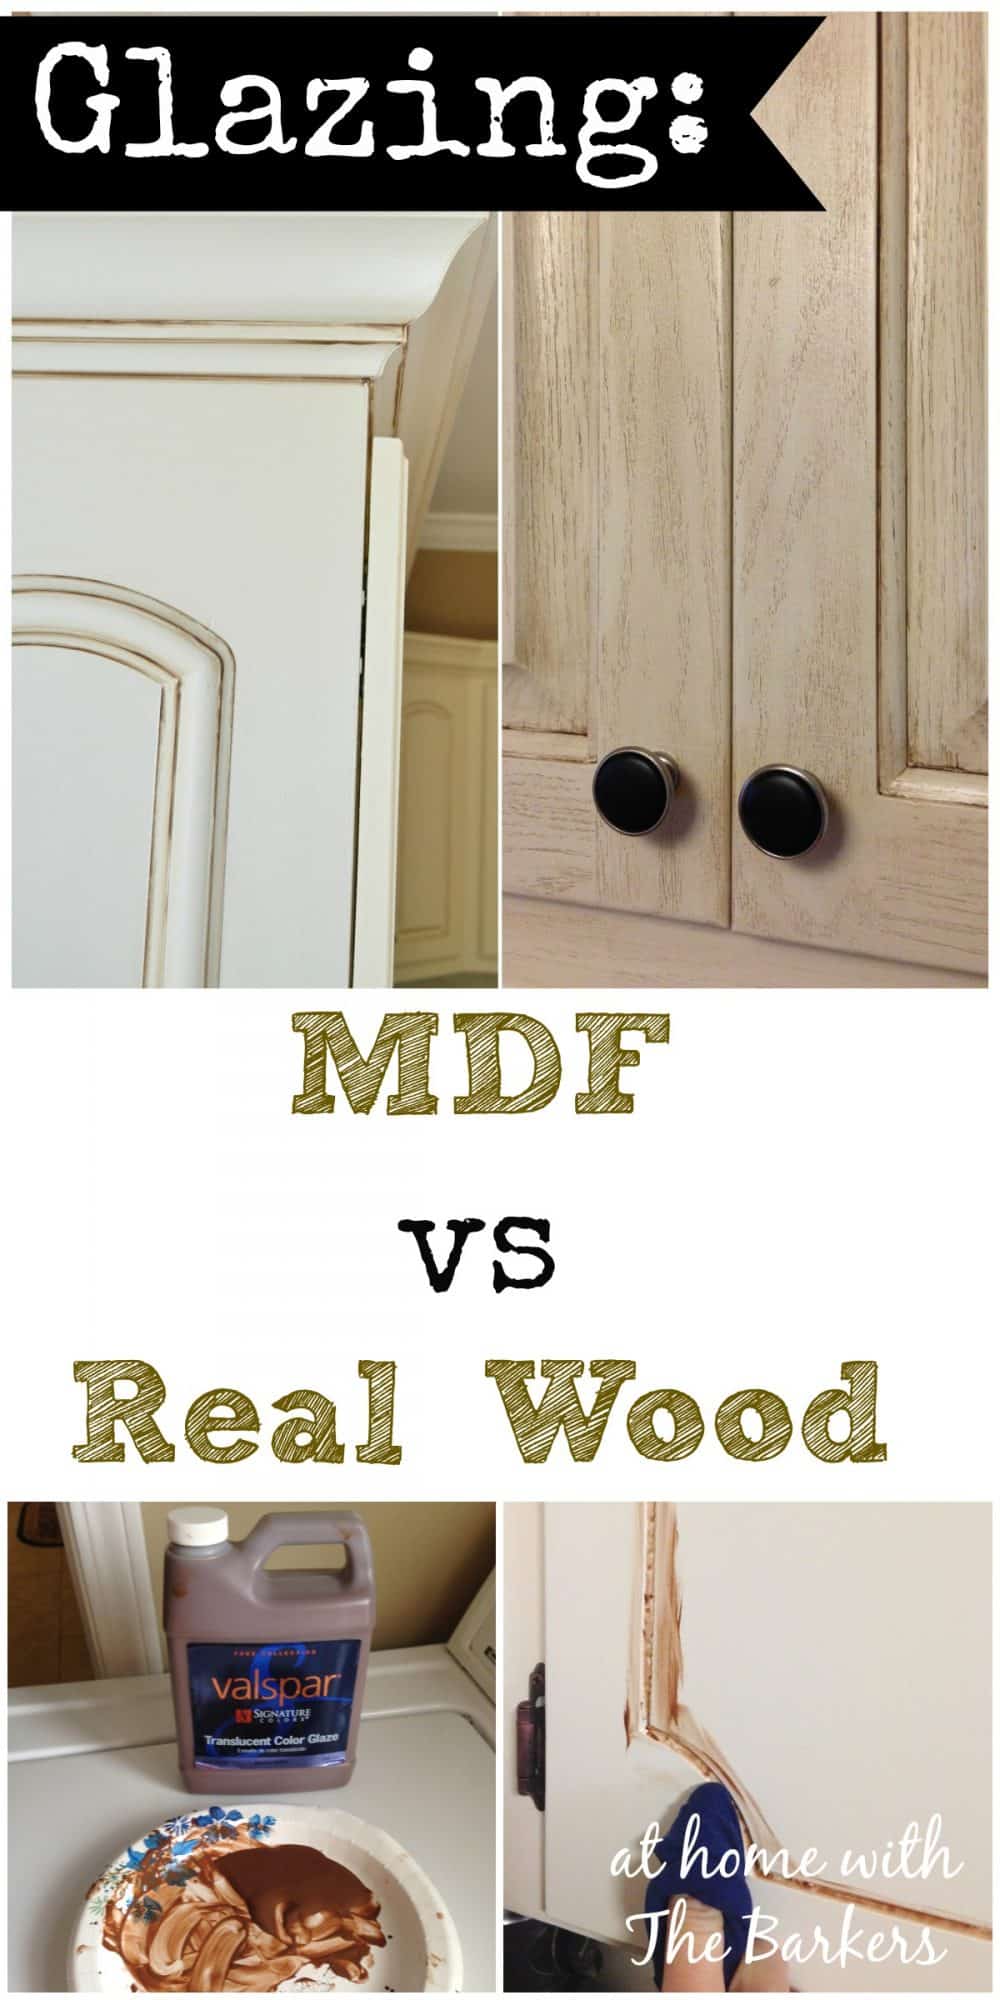 Glazing Mdf Versus Real Wood At Home With The Barkers